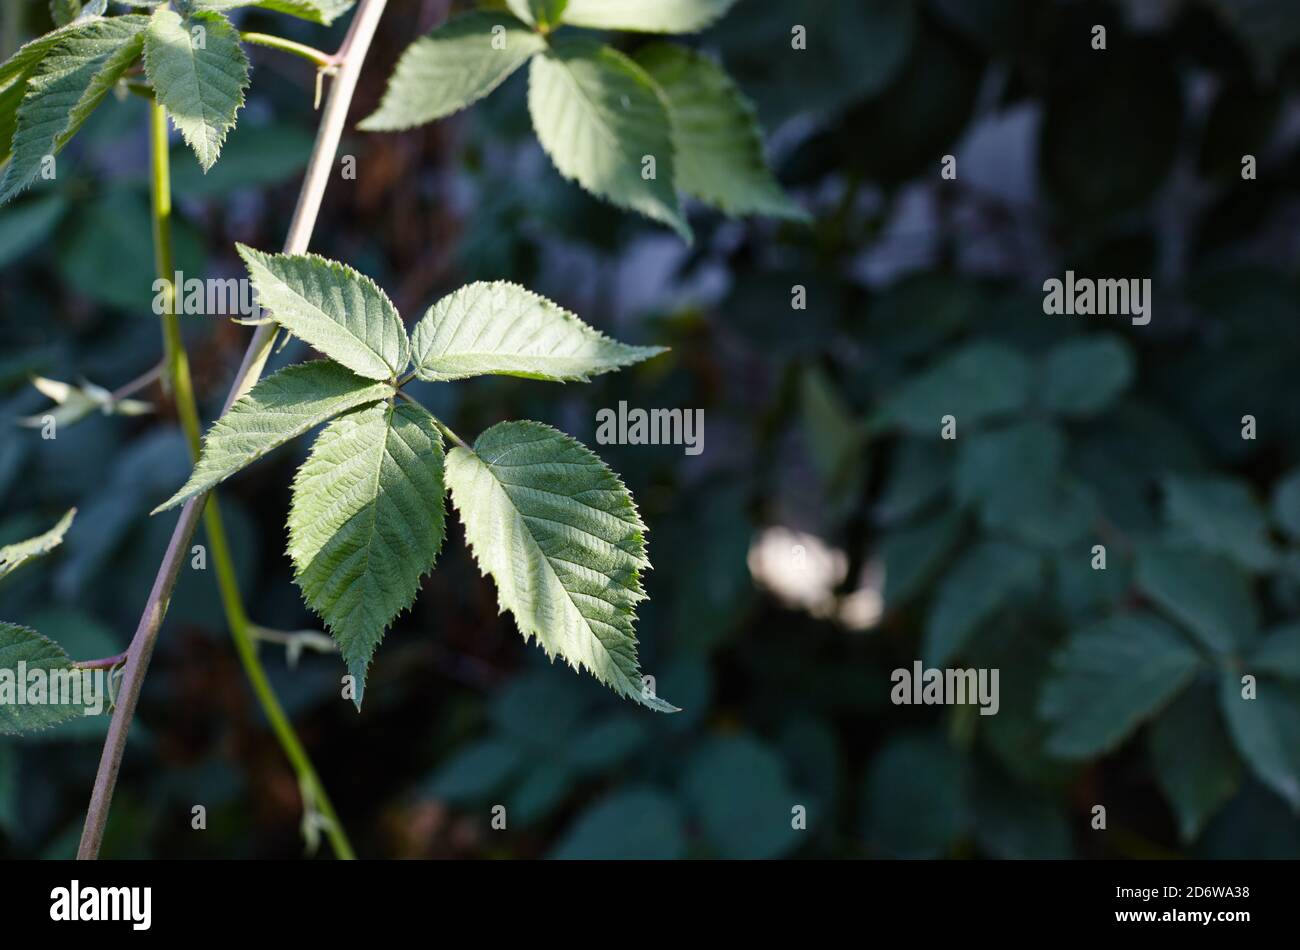 Abstract image of blackberry leaves in the garden. Selective focus, blurred background Stock Photo